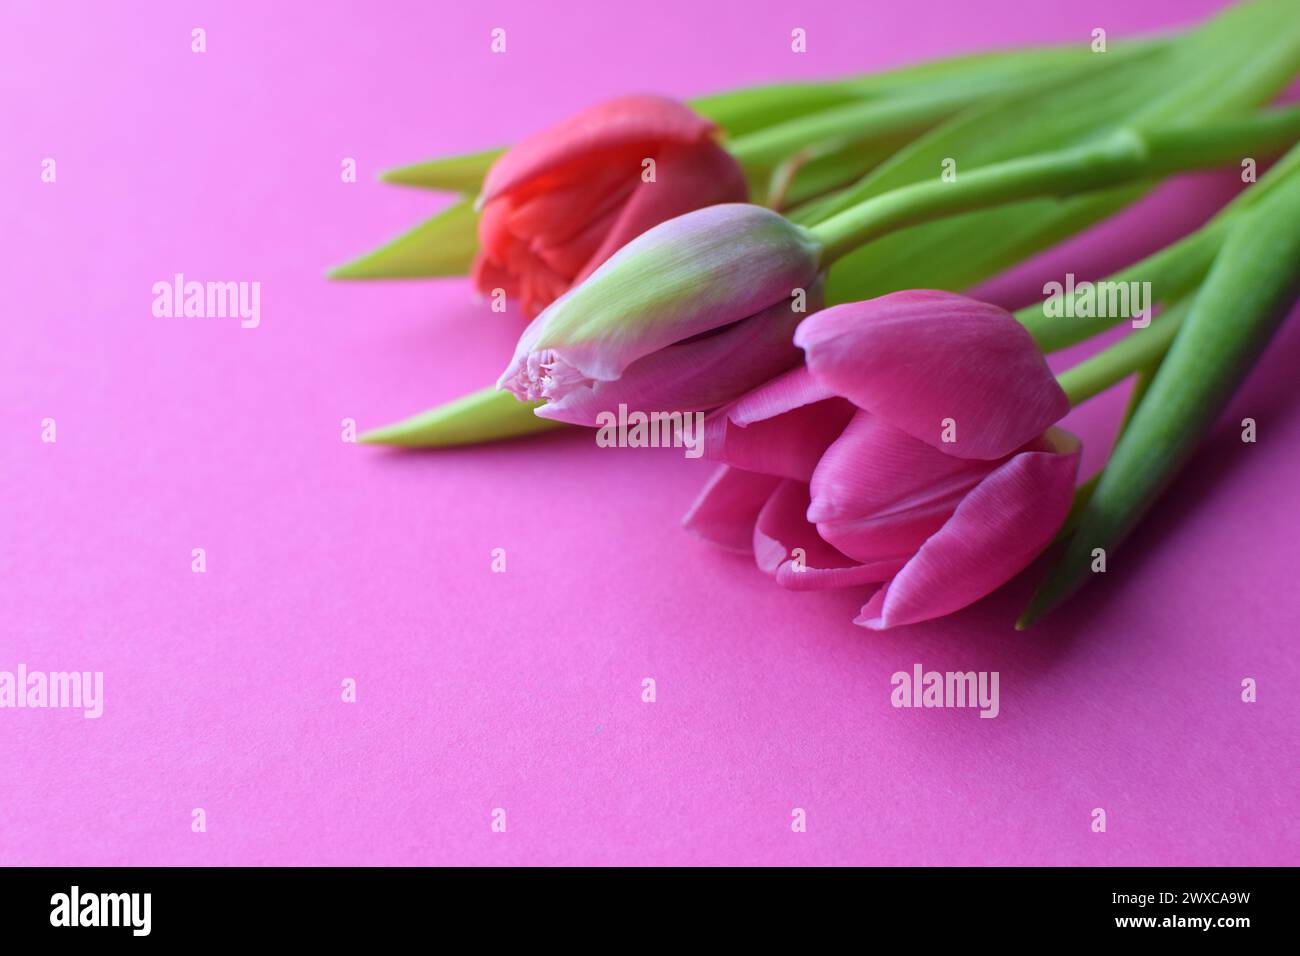 Bouquet of colorful spring tulips for Mother's Day or Women's Day on a  fuchsia background. Top view in flat style. Stock Photo